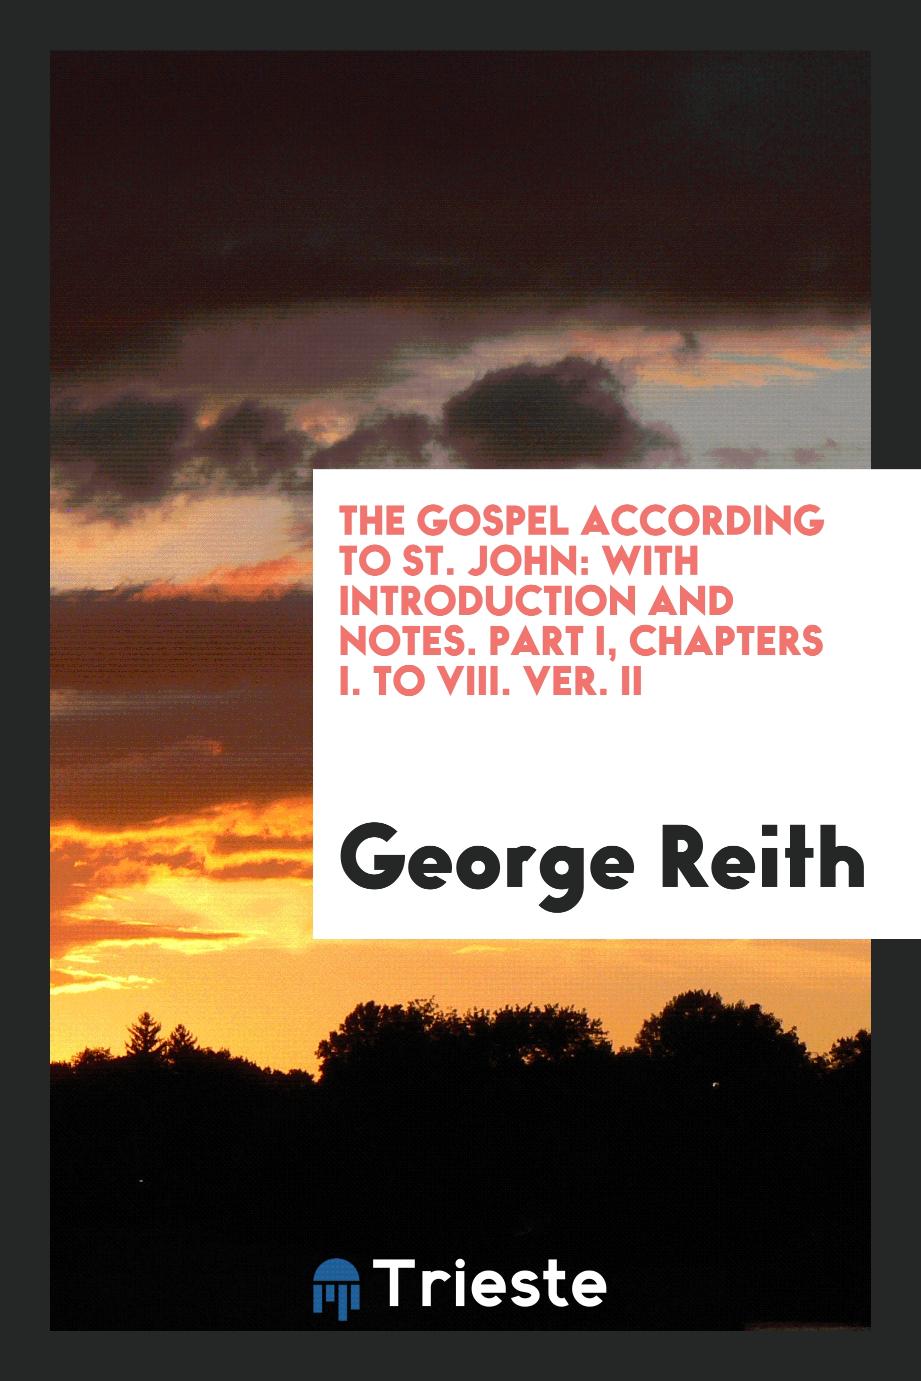 The Gospel according to St. John: with introduction and notes. Part I, chapters I. to VIII. ver. II